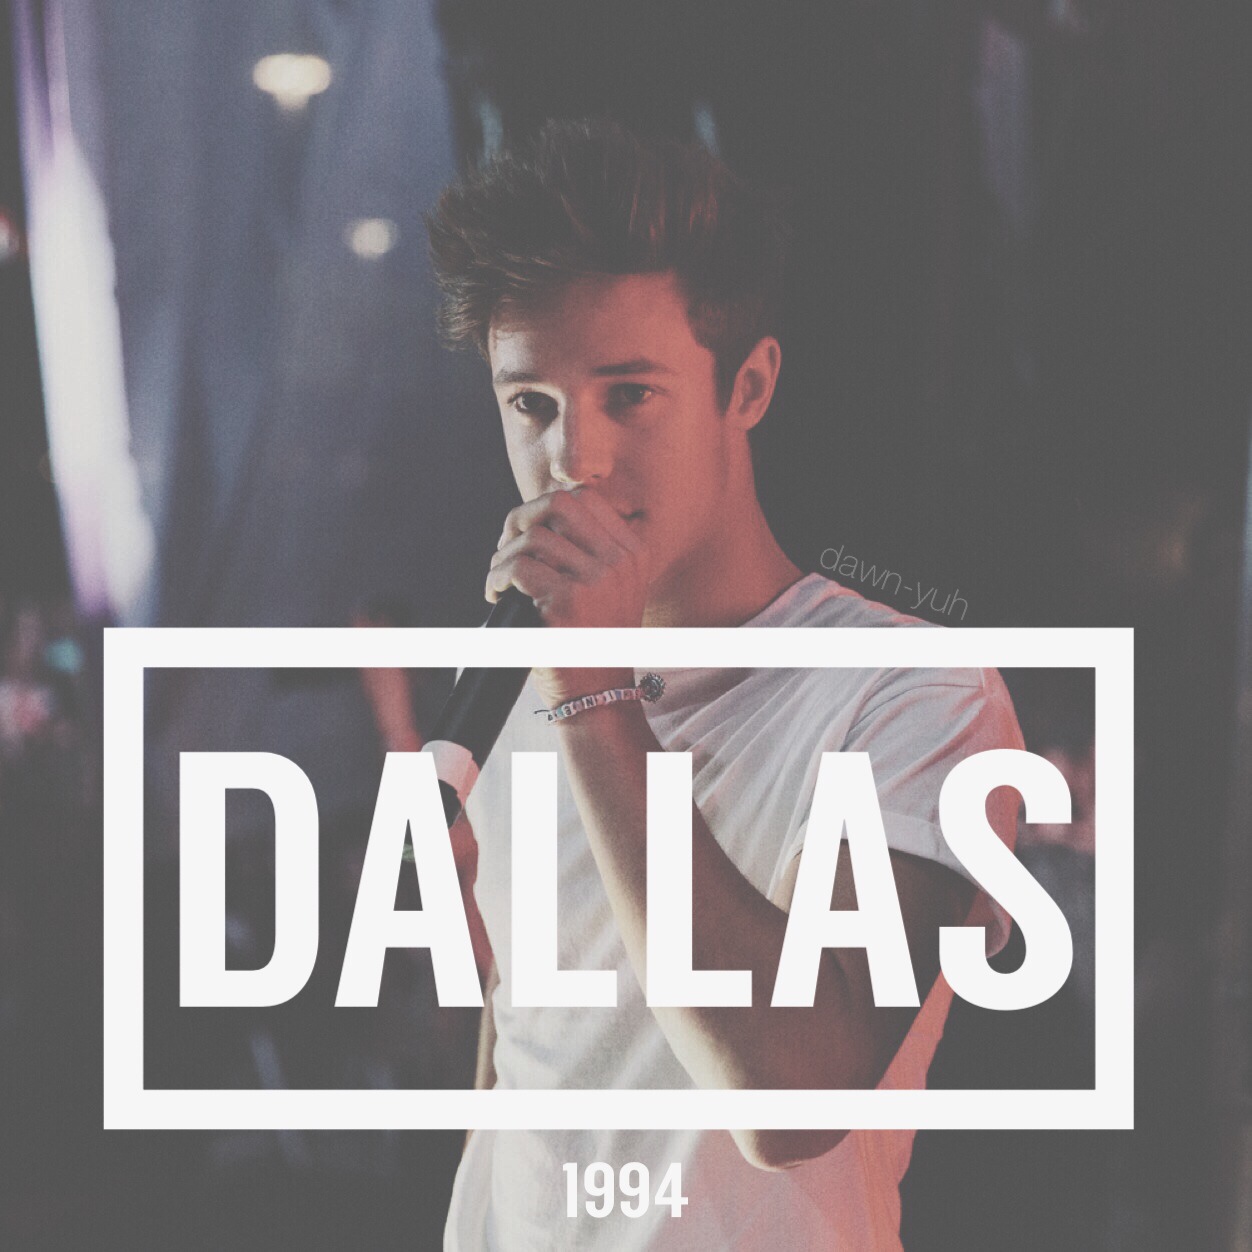 24 Images About ♥ Cameron Dallas ♥ On We Heart It - Cameron Dallas Tumblr Edit , HD Wallpaper & Backgrounds